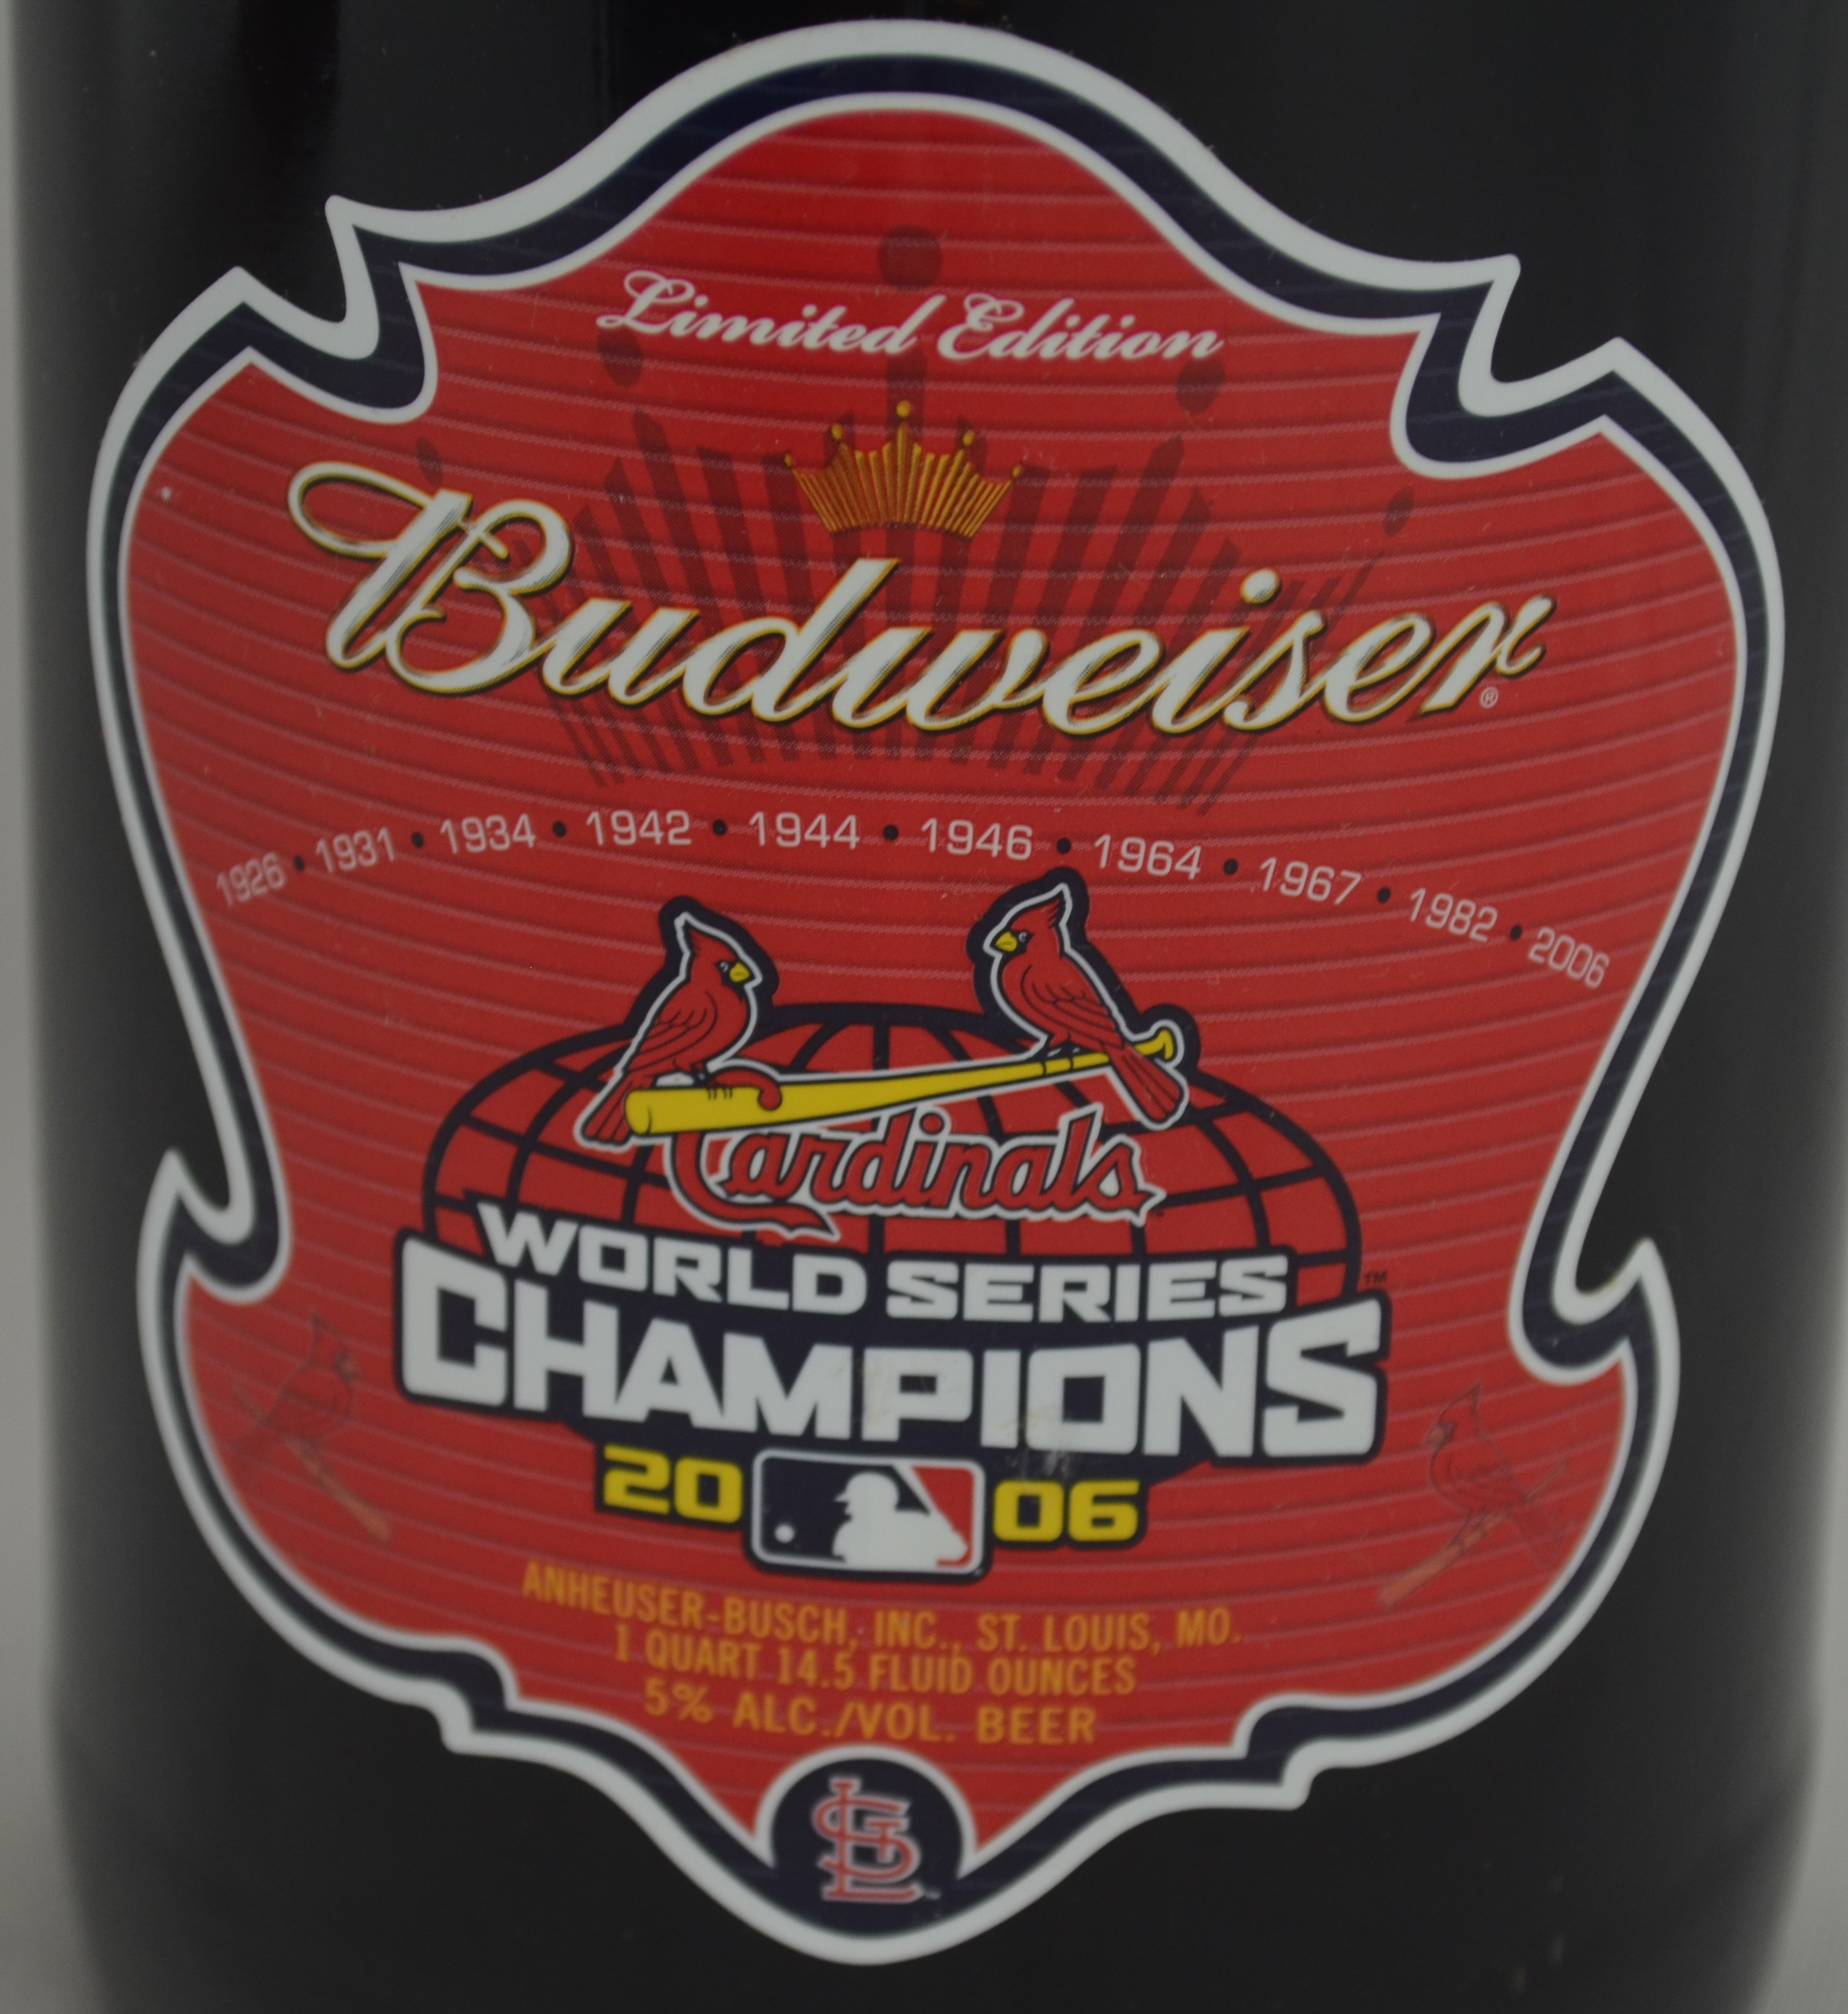 World Series Champions: St. Louis Cardinals – The Creative Company Shop